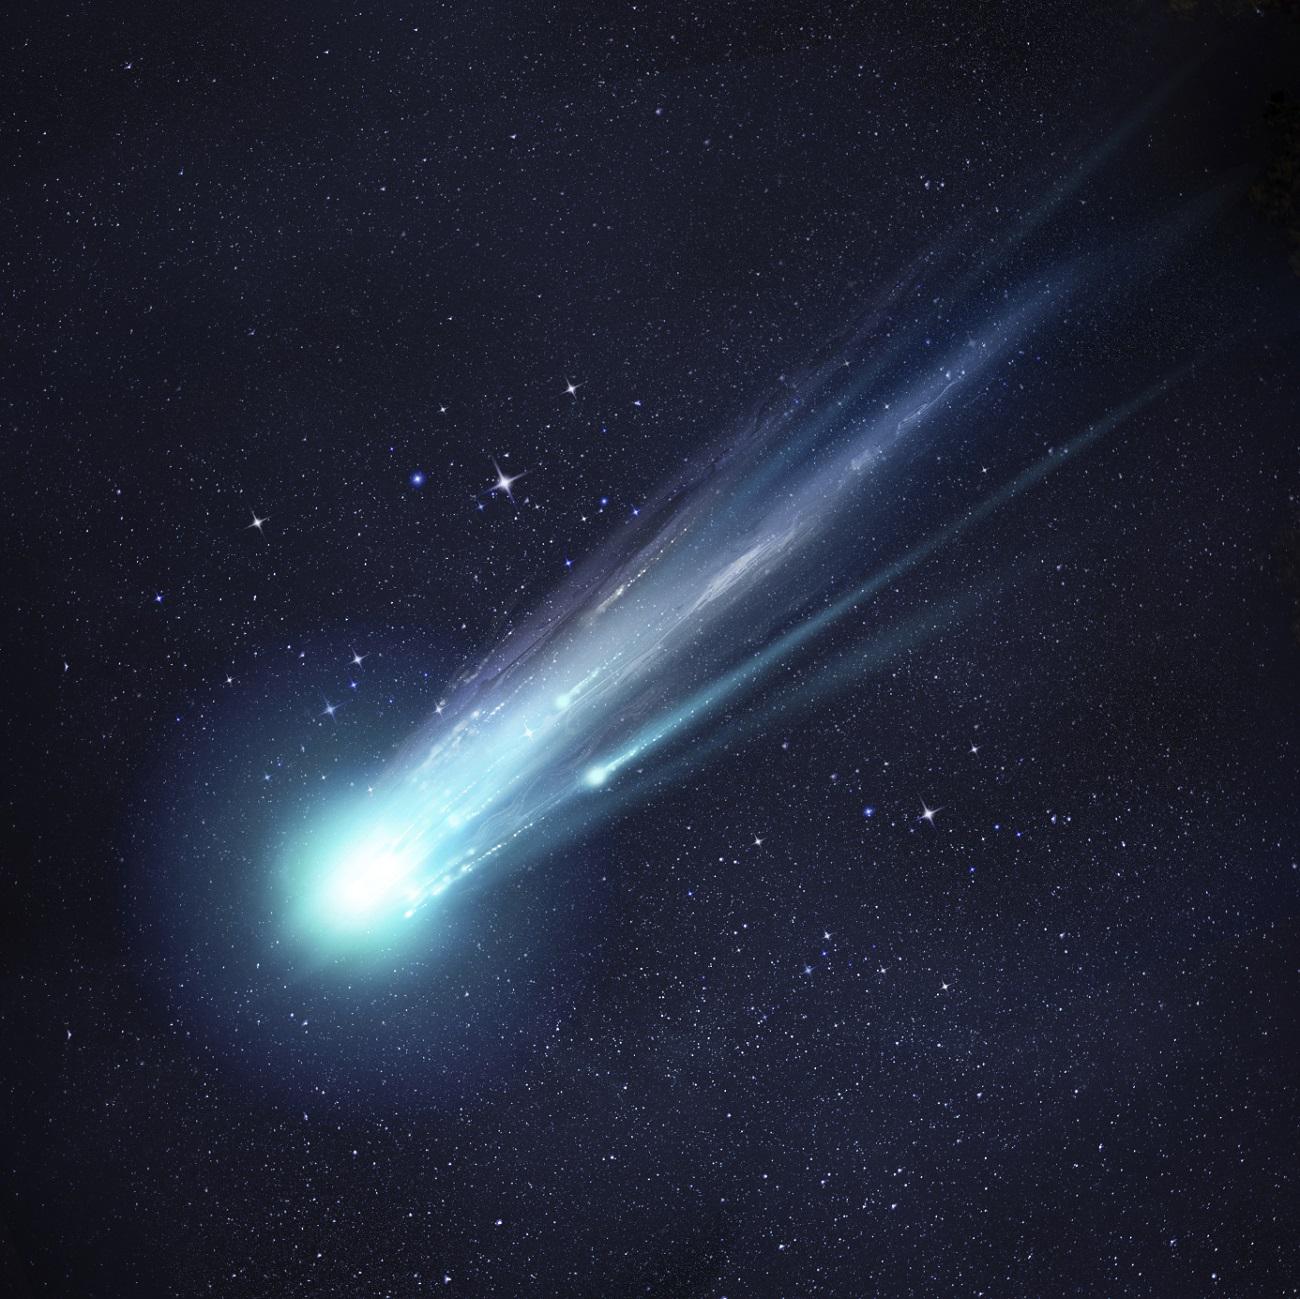 Comet meaning